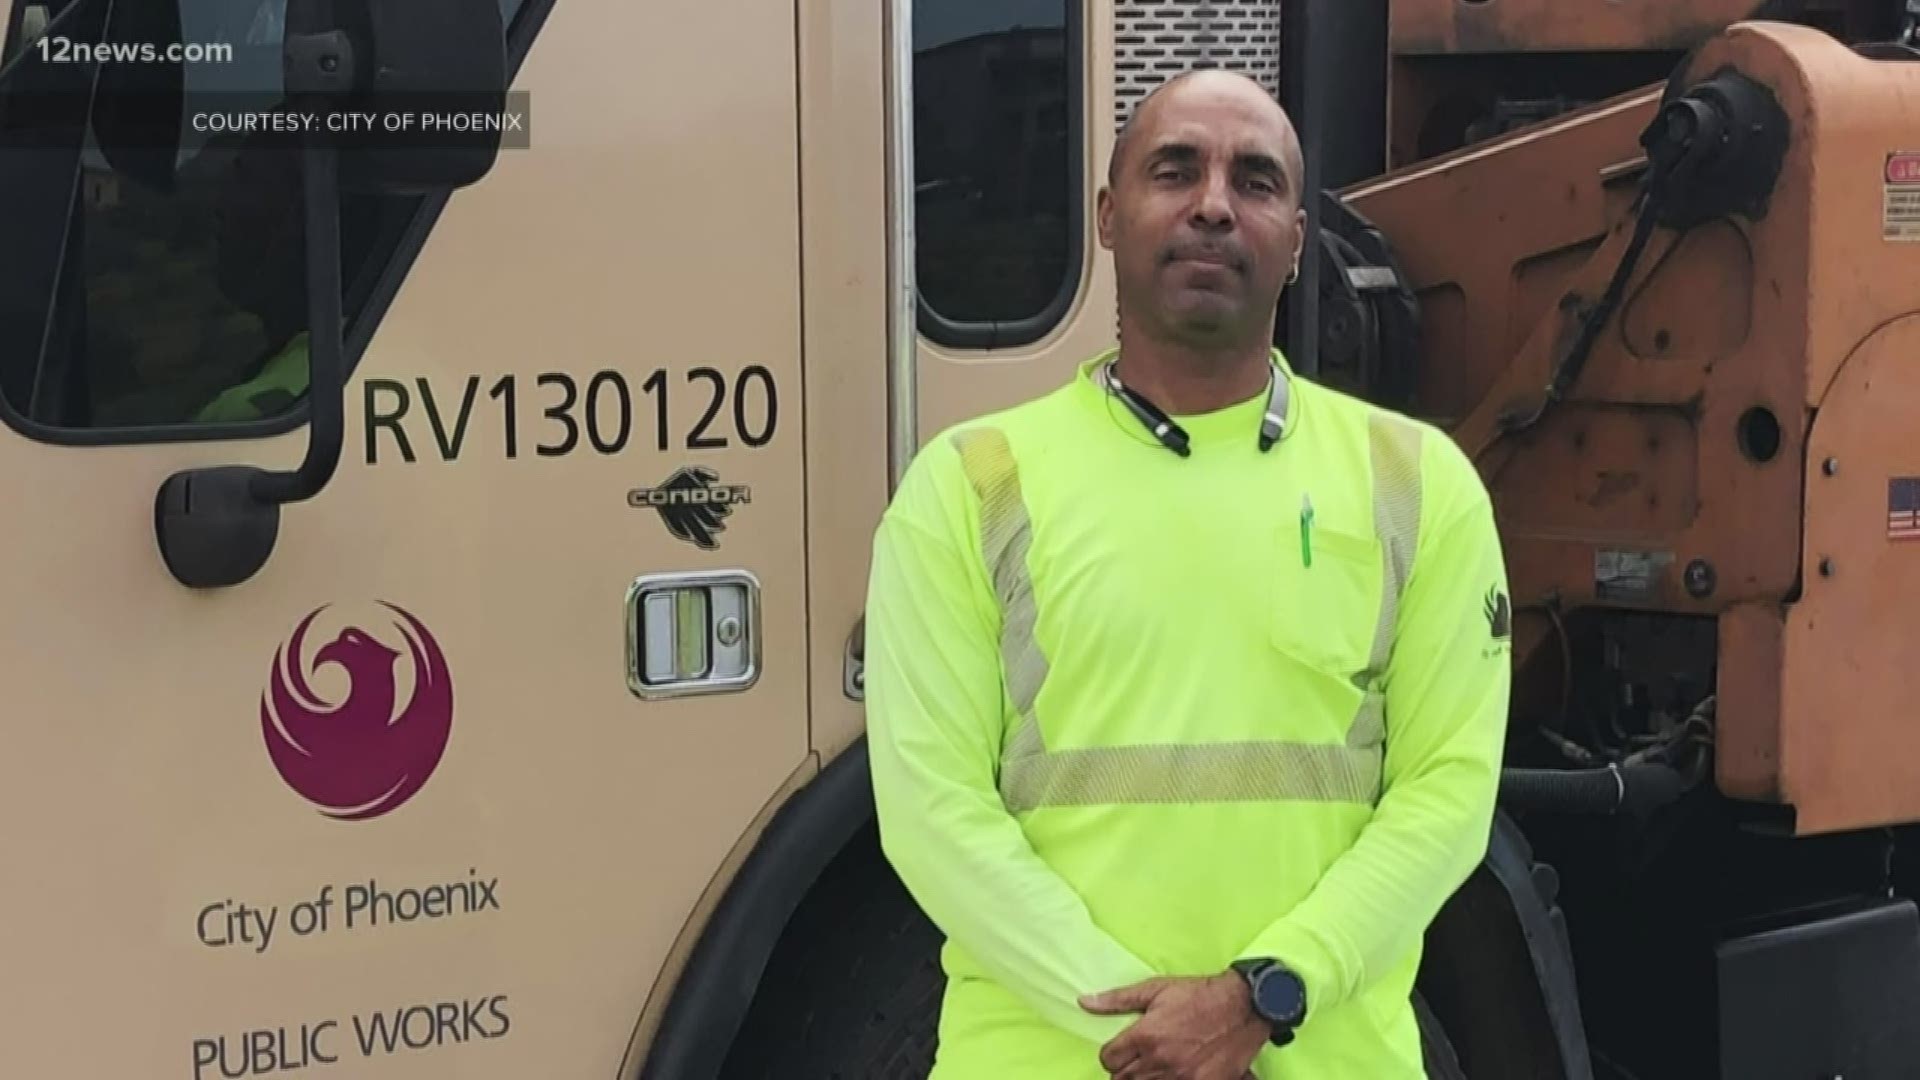 A Phoenix recycling truck driver is being hailed a hero after racing into a house to save the people inside. He says he did what anyone would have done.